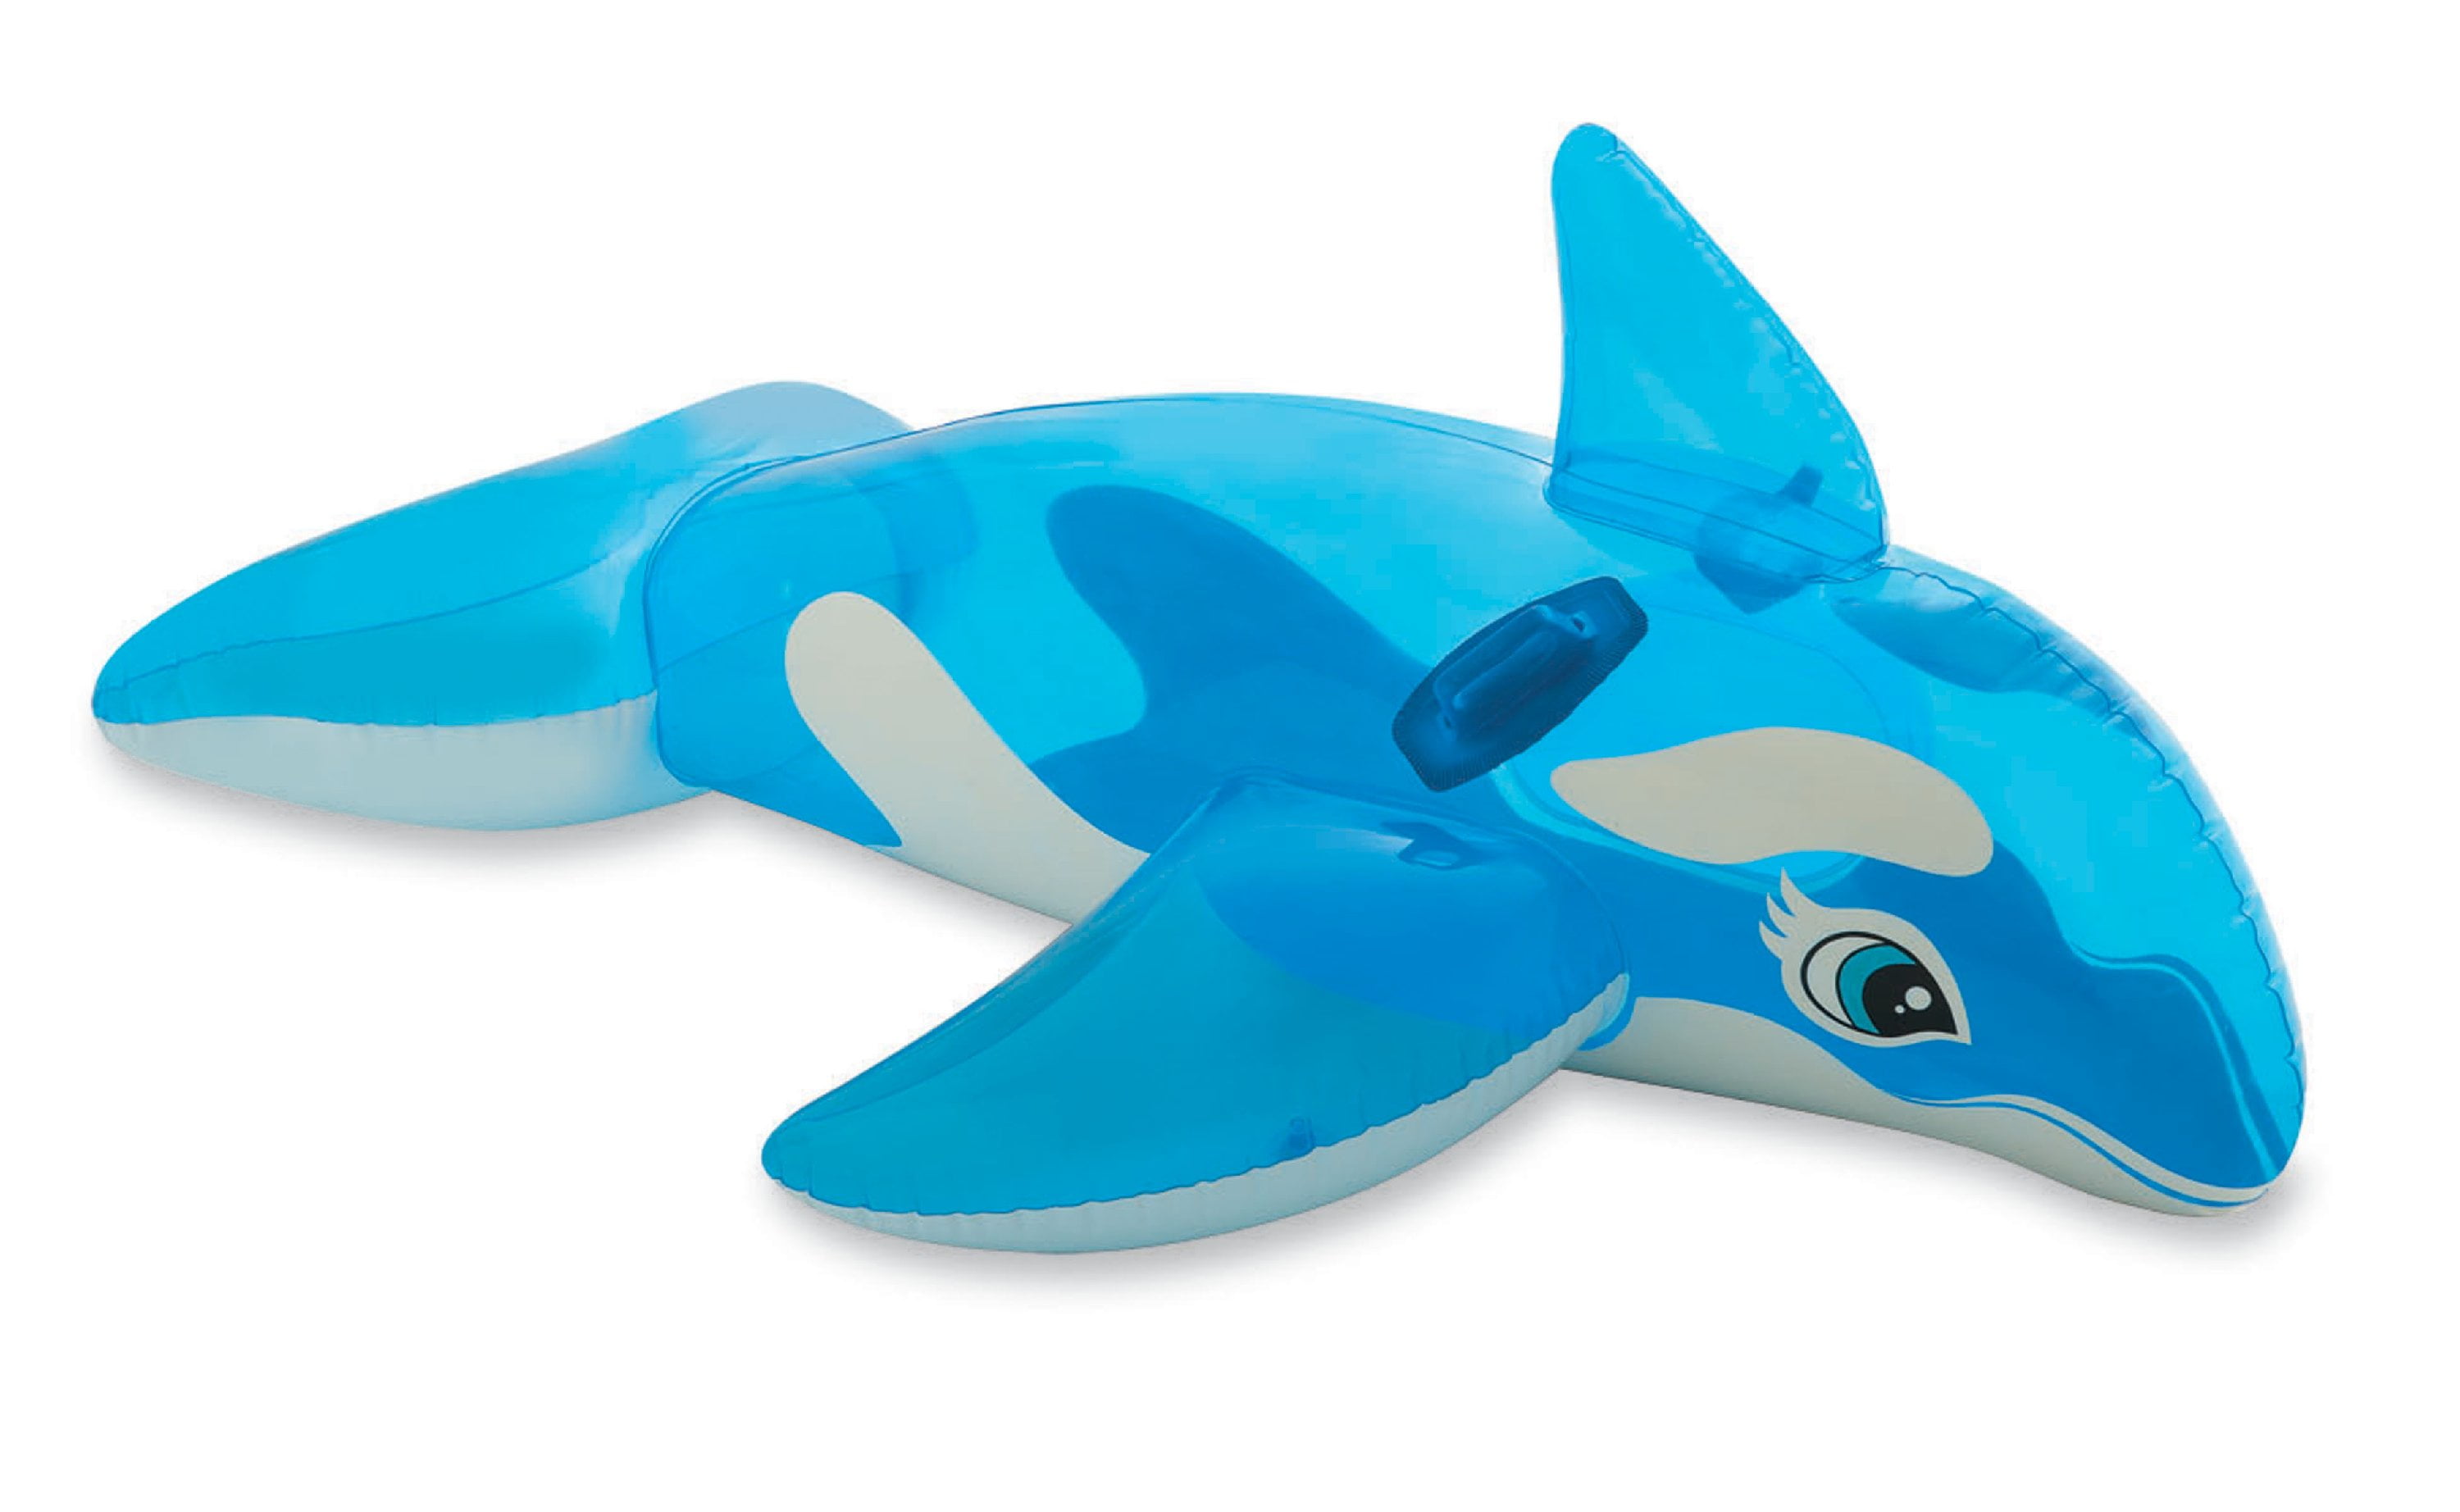 Intex 58539EP Swimming Pool Friendly Whale Ride-On Floating Lounge For Kids Fun 